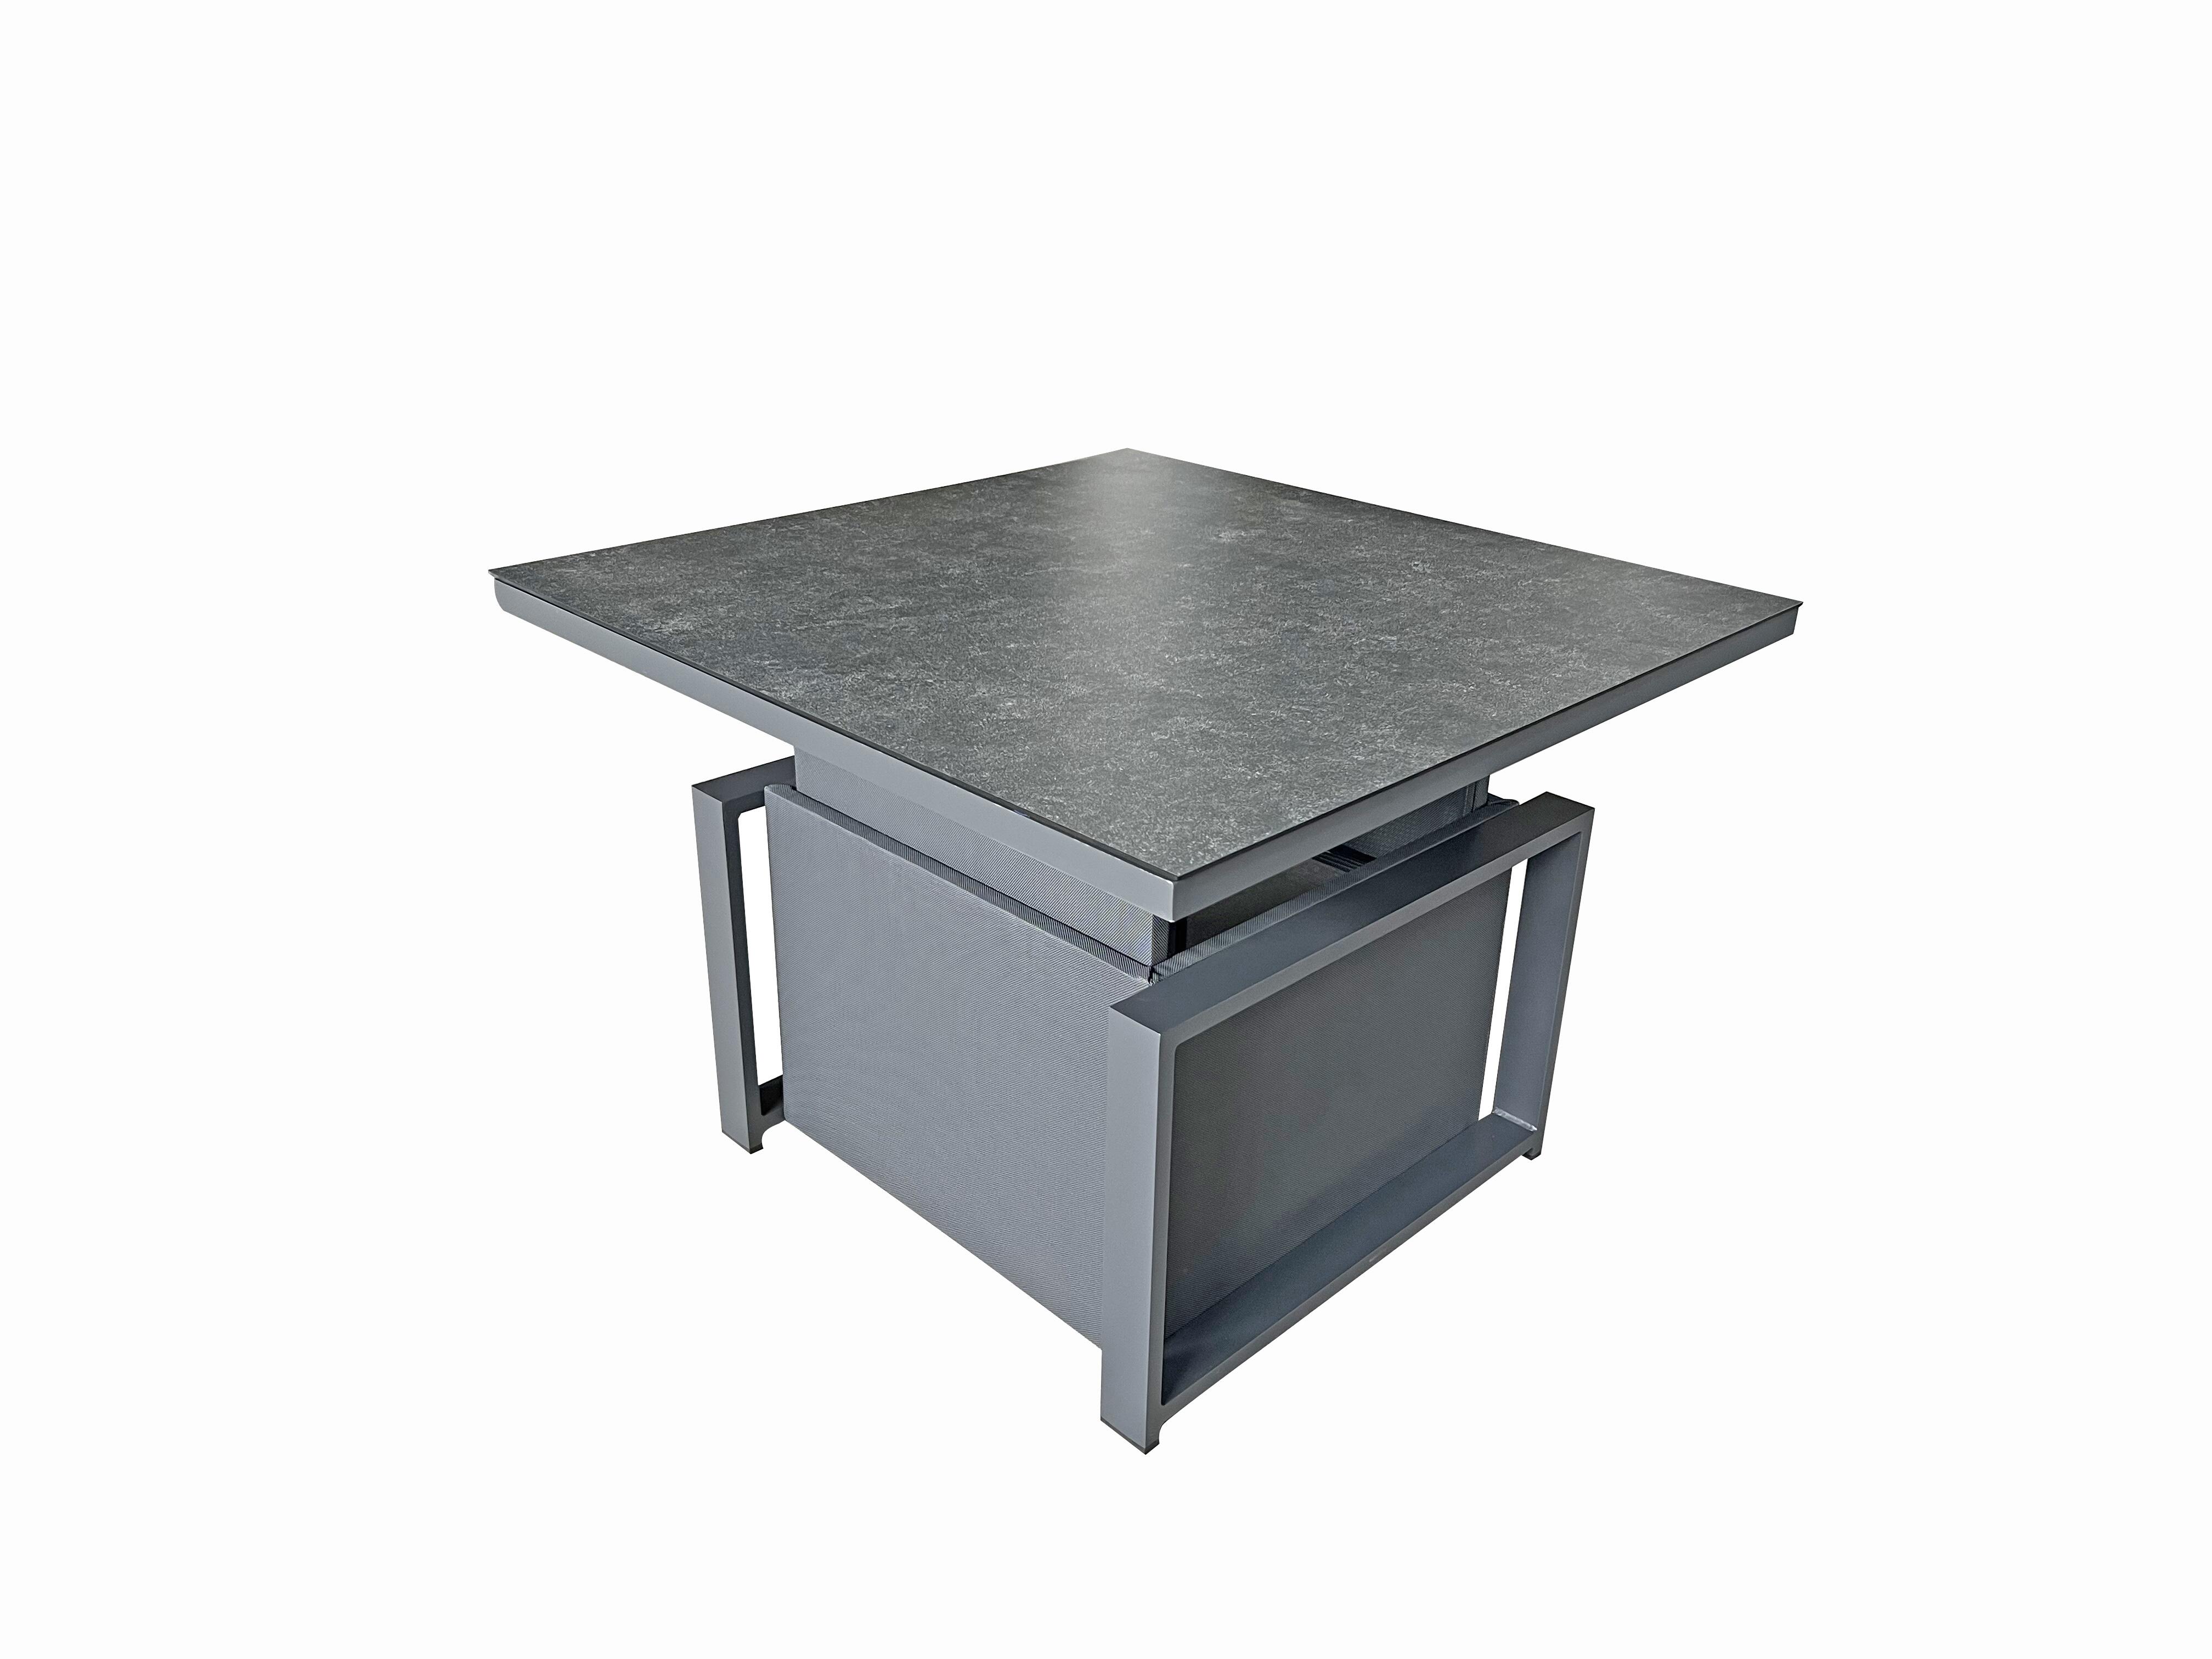 An image of Signature Weave Madrid Grey Lift Table Garden Furniture